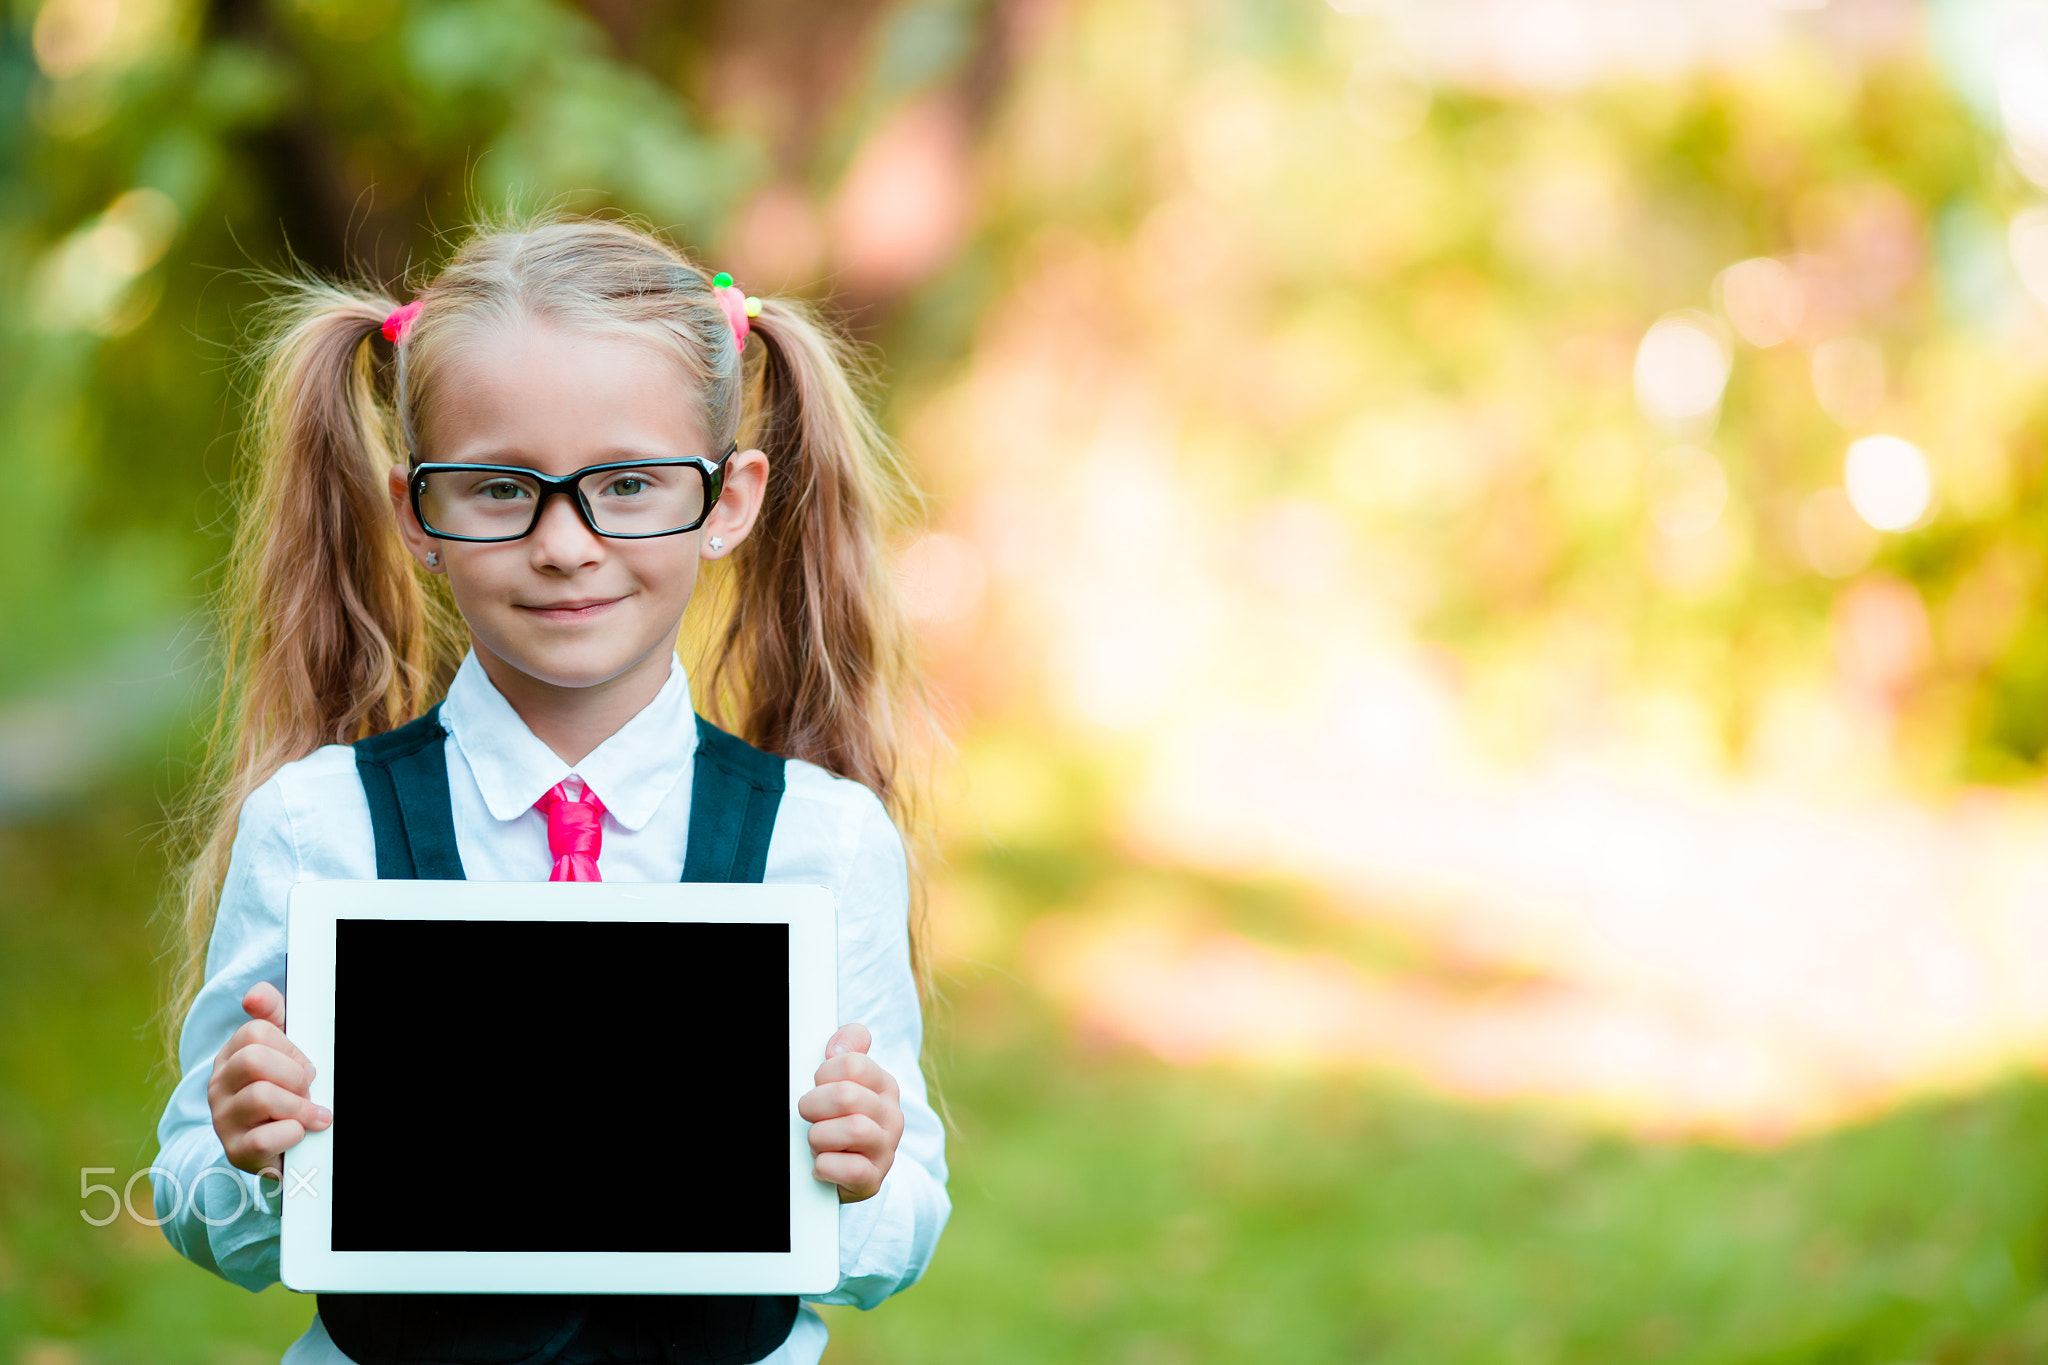 Adorable little girl holding tablet PC outdoors in autumn sunny day